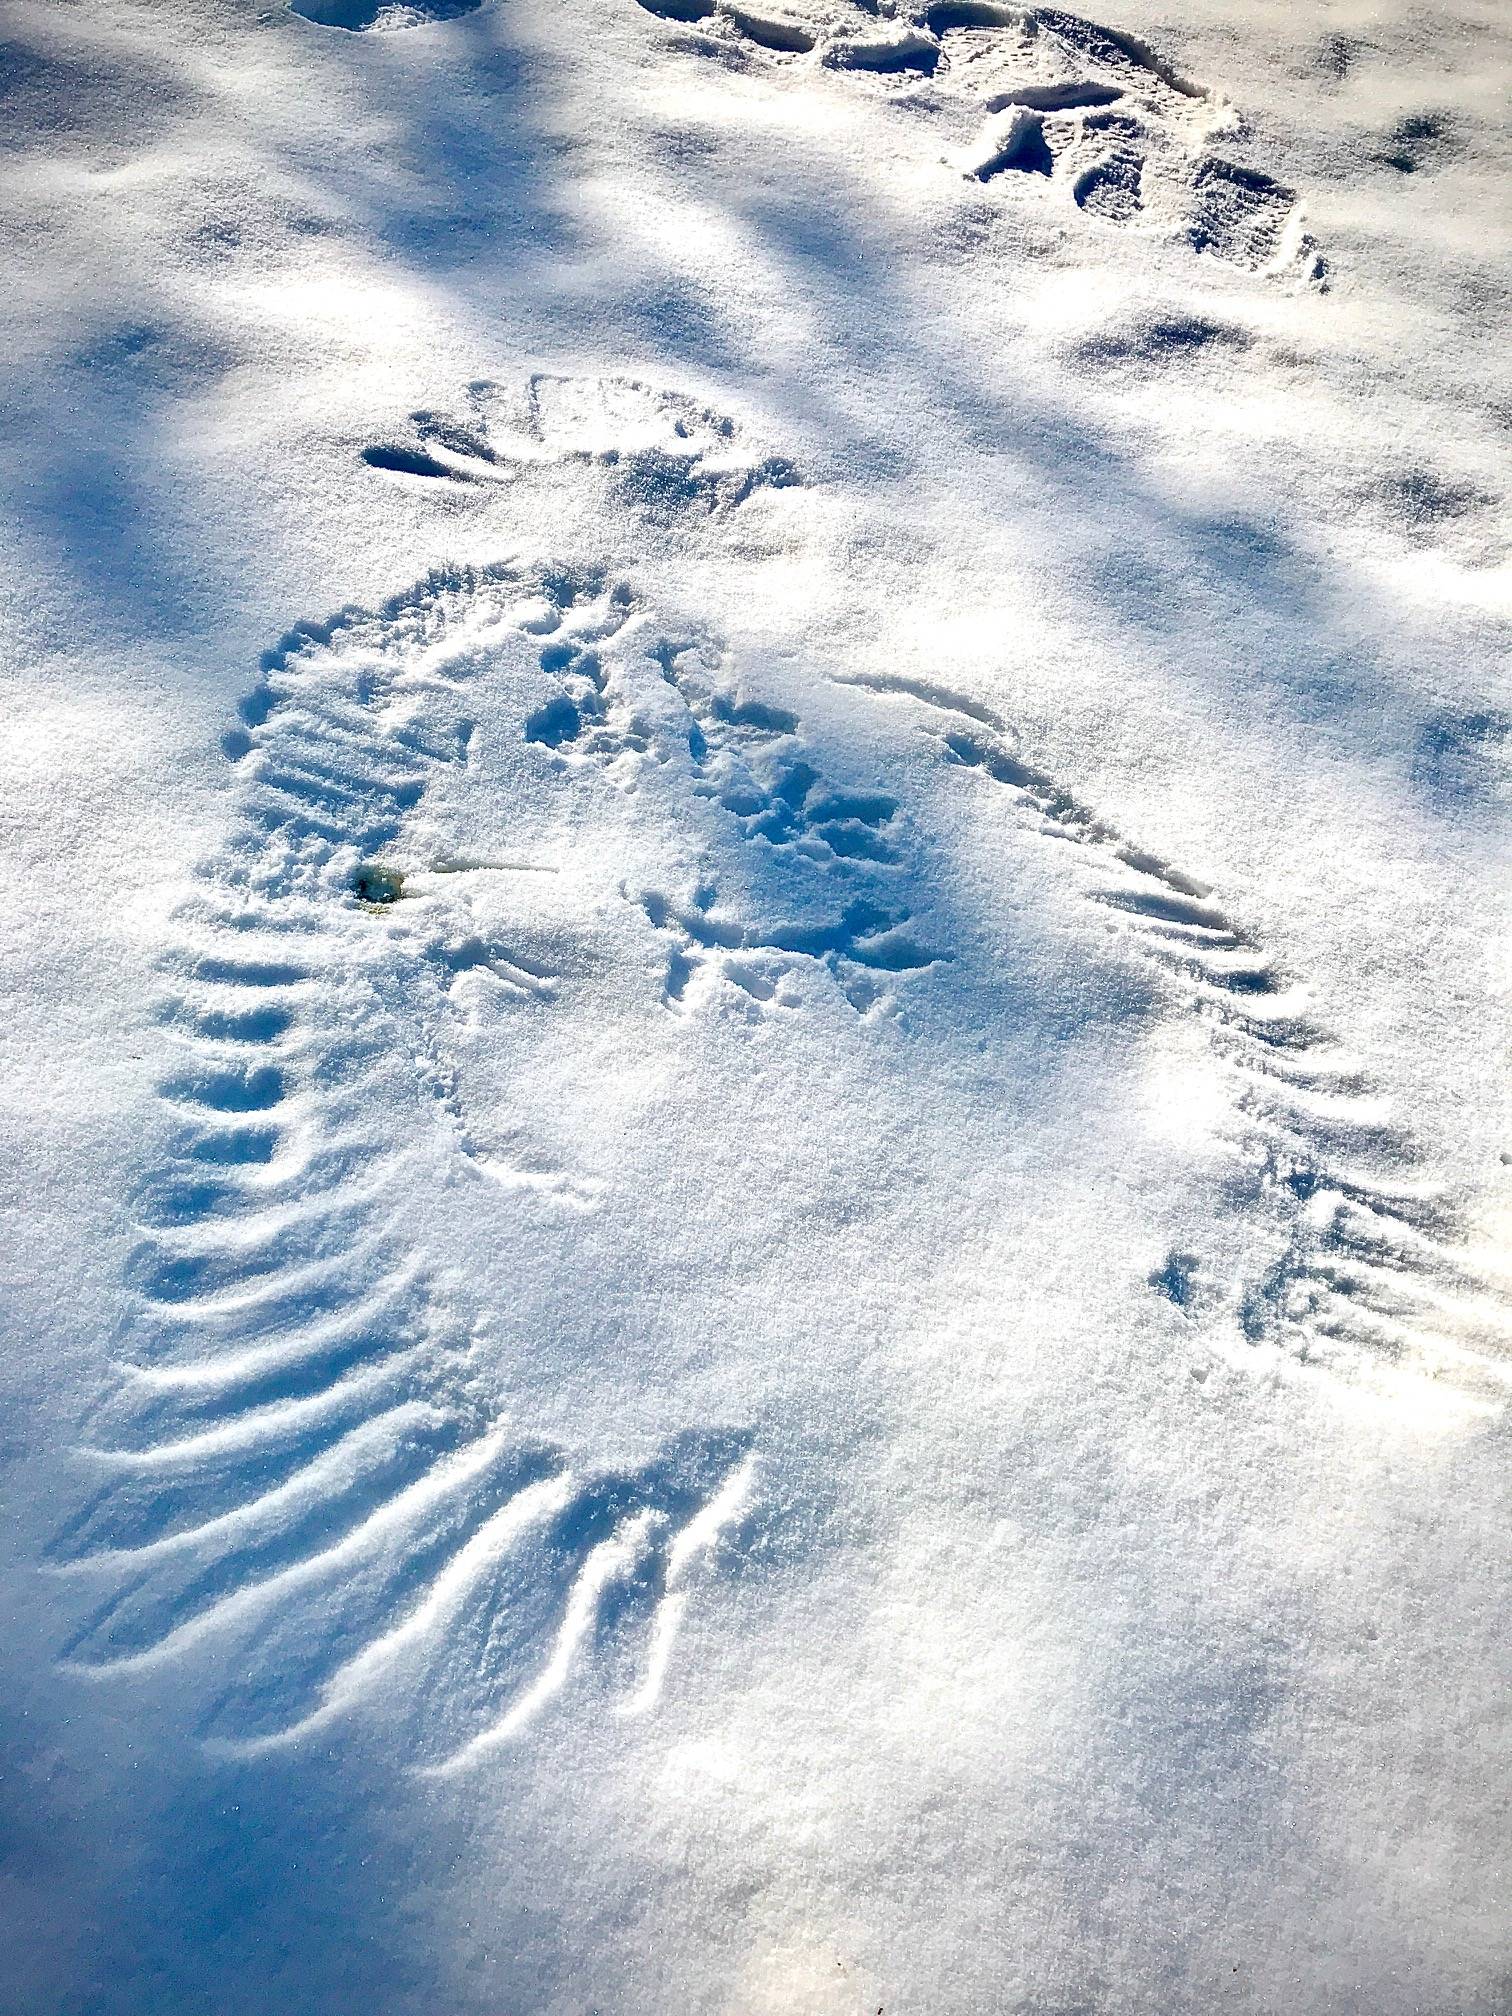 Gene Randall, who took this photo, says he enjoys tracking mice, squirrel, porcupine, mink, otter and deer through our winter lawn but have never seen such a display of the “Snow Phoenix” and the likely demise of a mouse. The photo was taken March 11, 2020. (Courtesy Photo | Gene Randall)